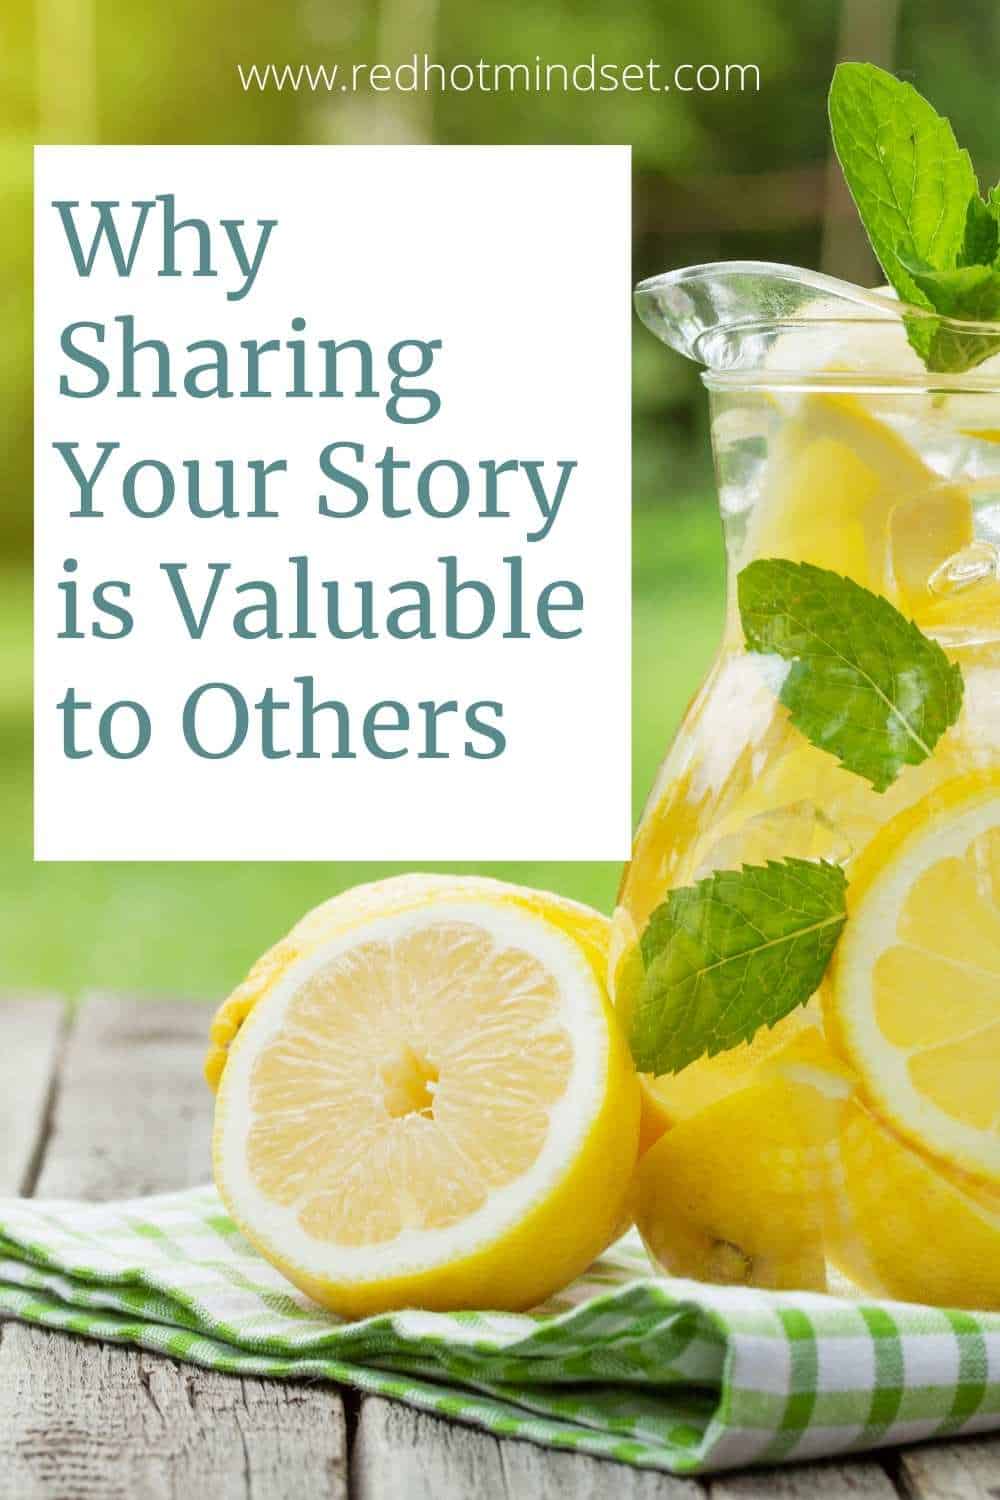 Why Sharing Your Story is Valuable to Others